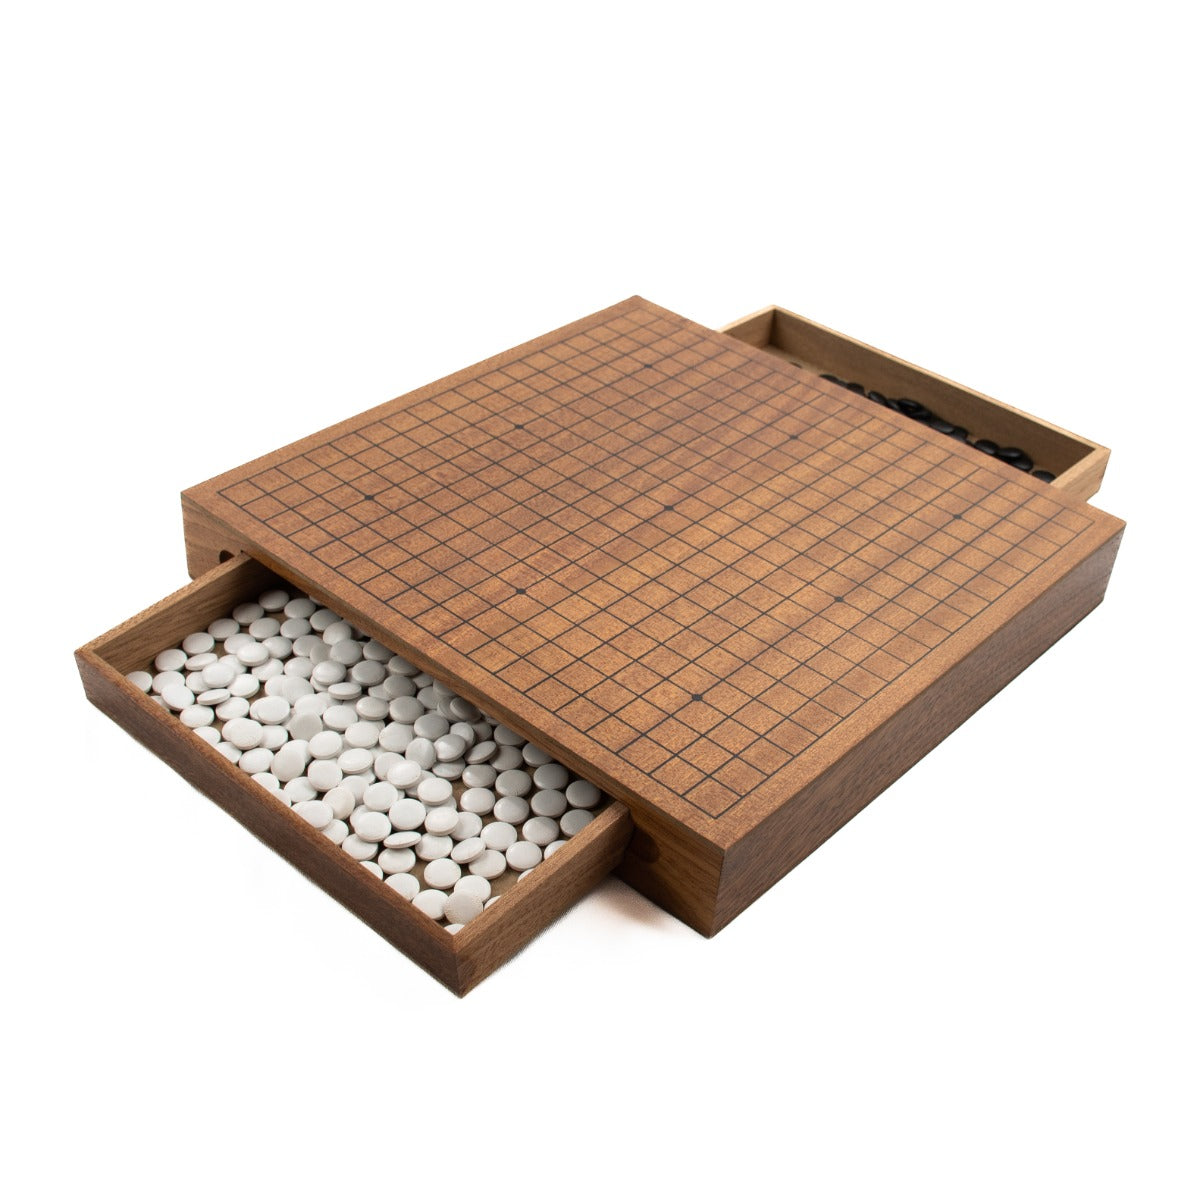 Go / Weiqi - 30cm Wooden Set with Drawers (Lets Play Games)